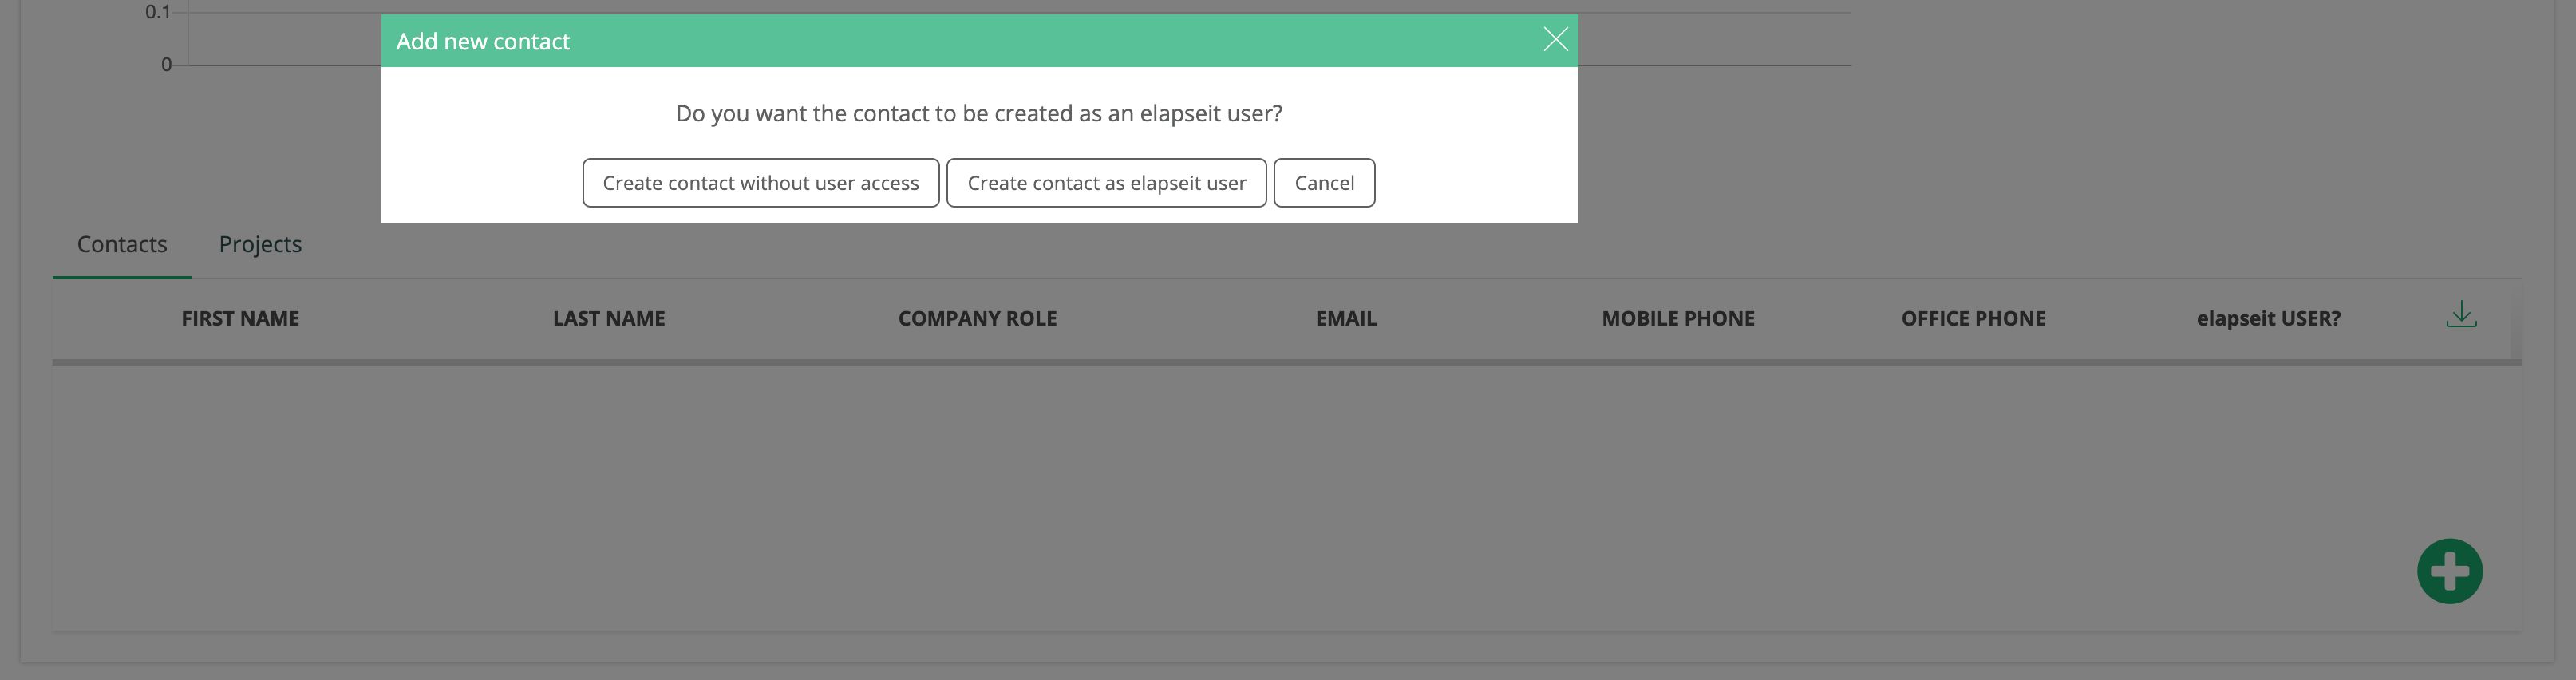 Adding contact with elapseit license